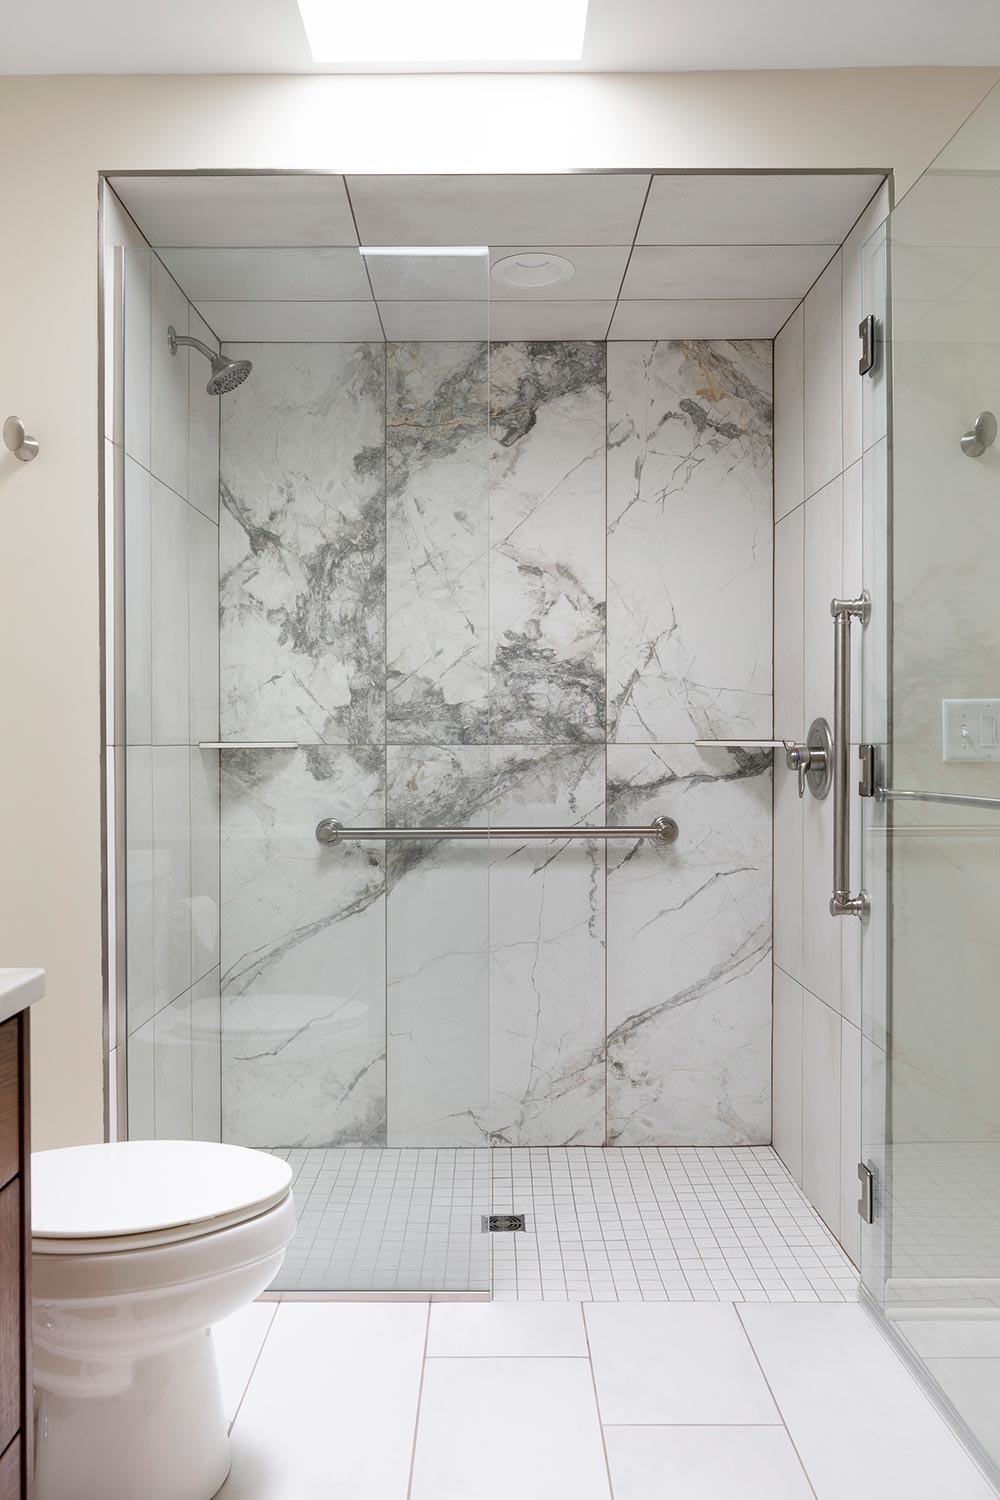 Curb-less floor in accessible design shower